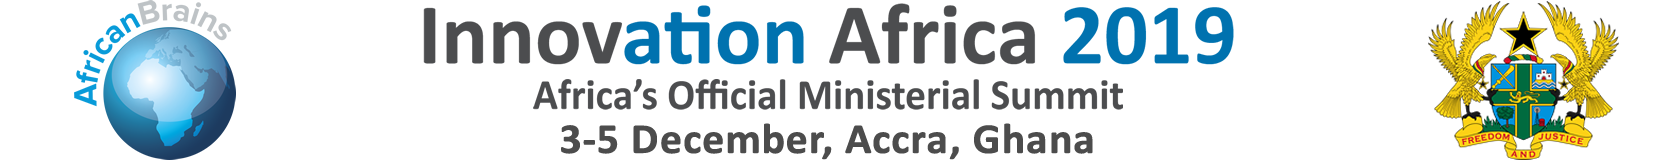 Africa's Official Ministerial Summit - 3-5 December, Accra, Ghana